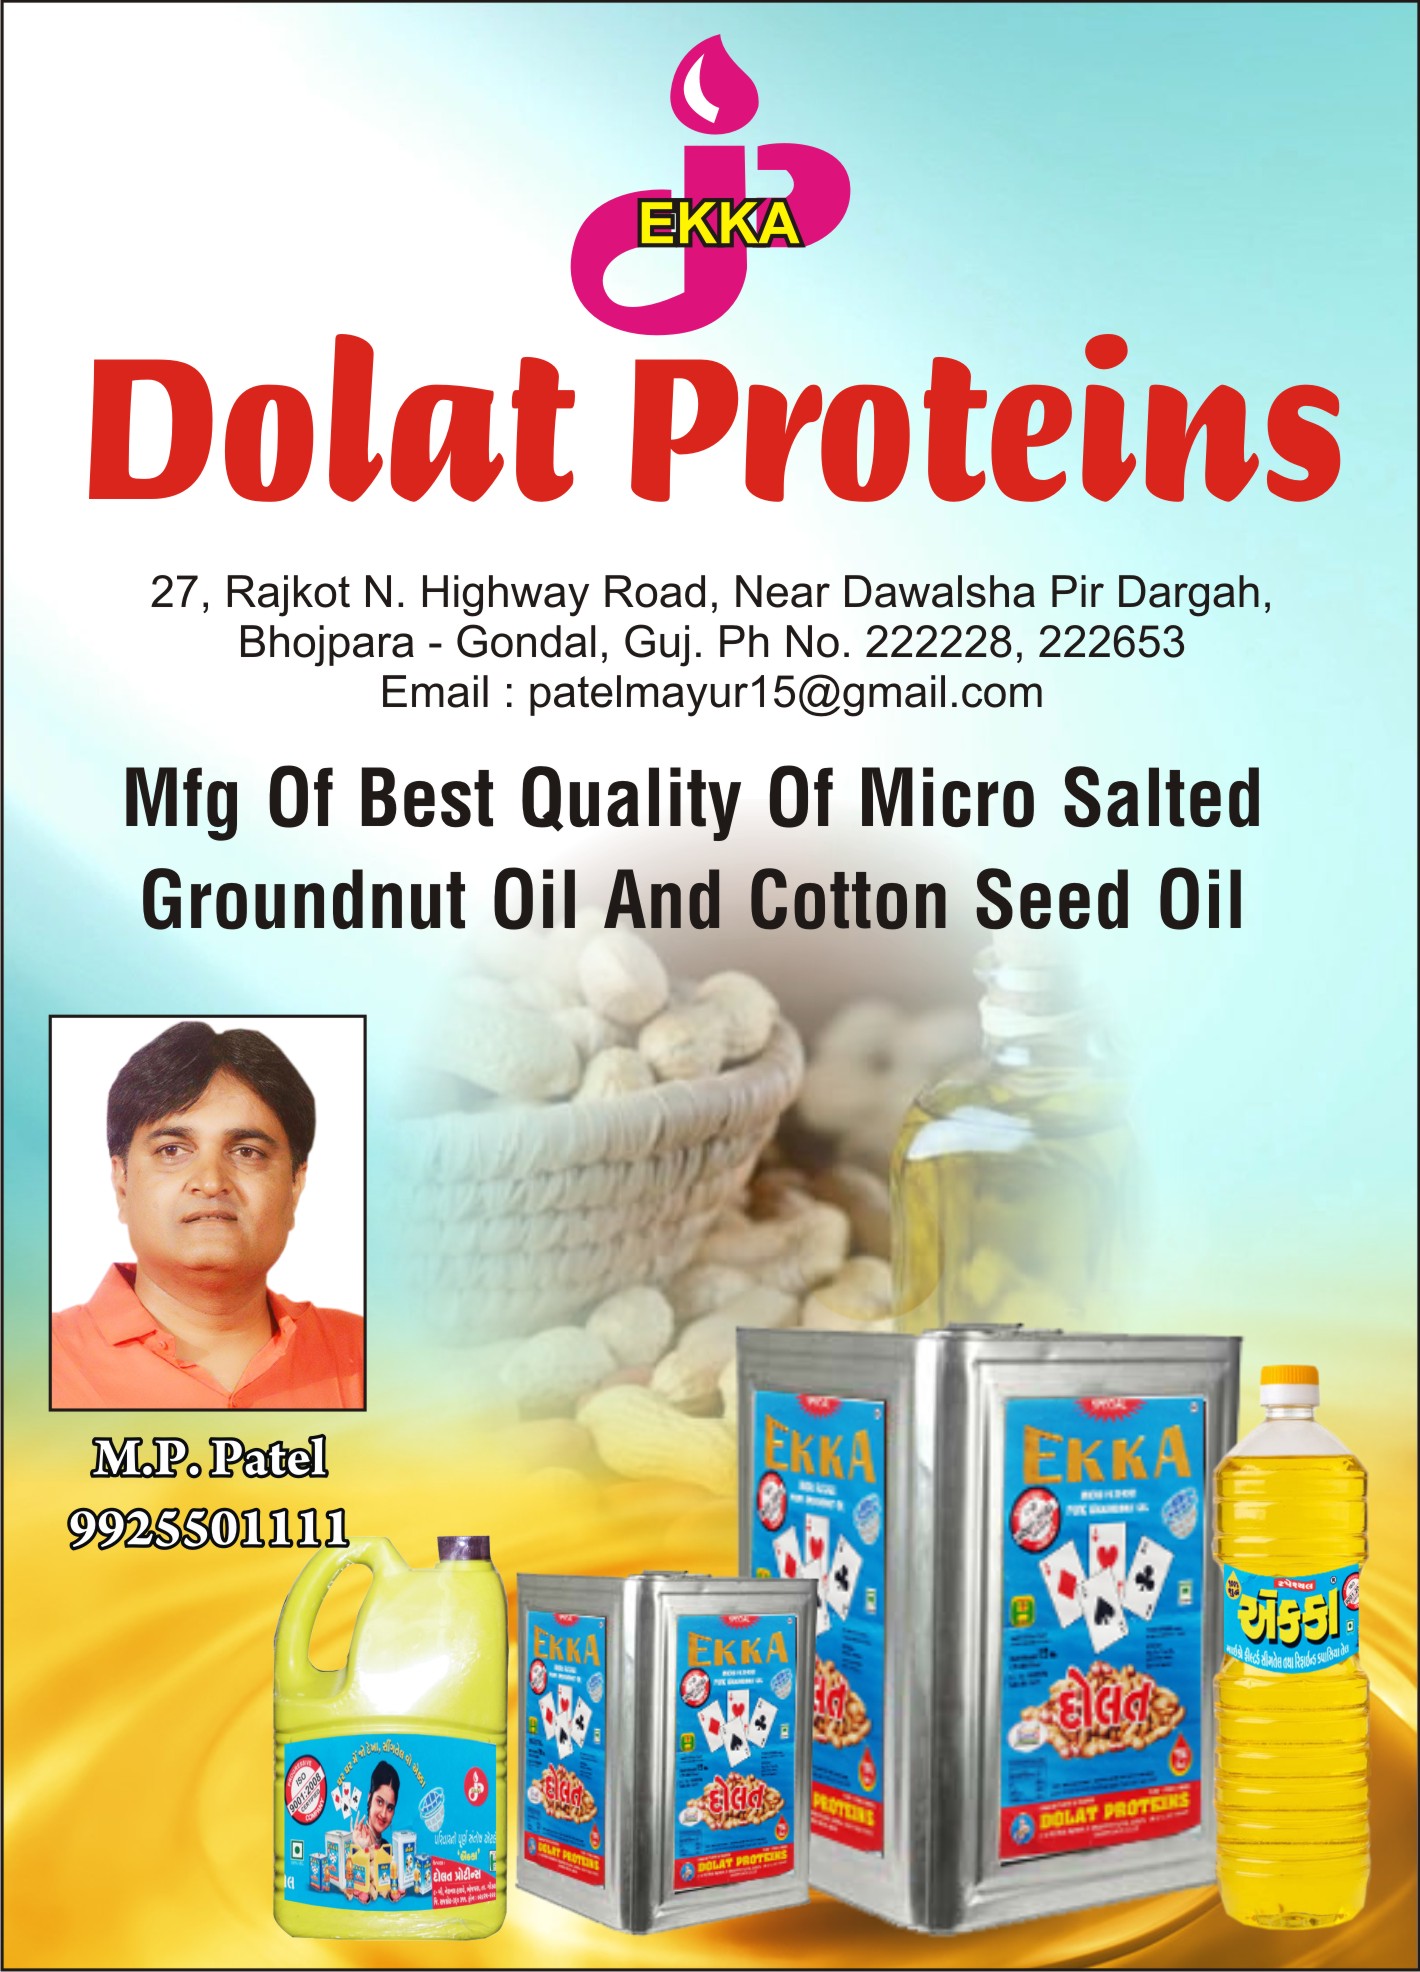 Dolat Proteins - Manufacturer Of Micro Salted Groundnut Oil And Cotton Seed Oil